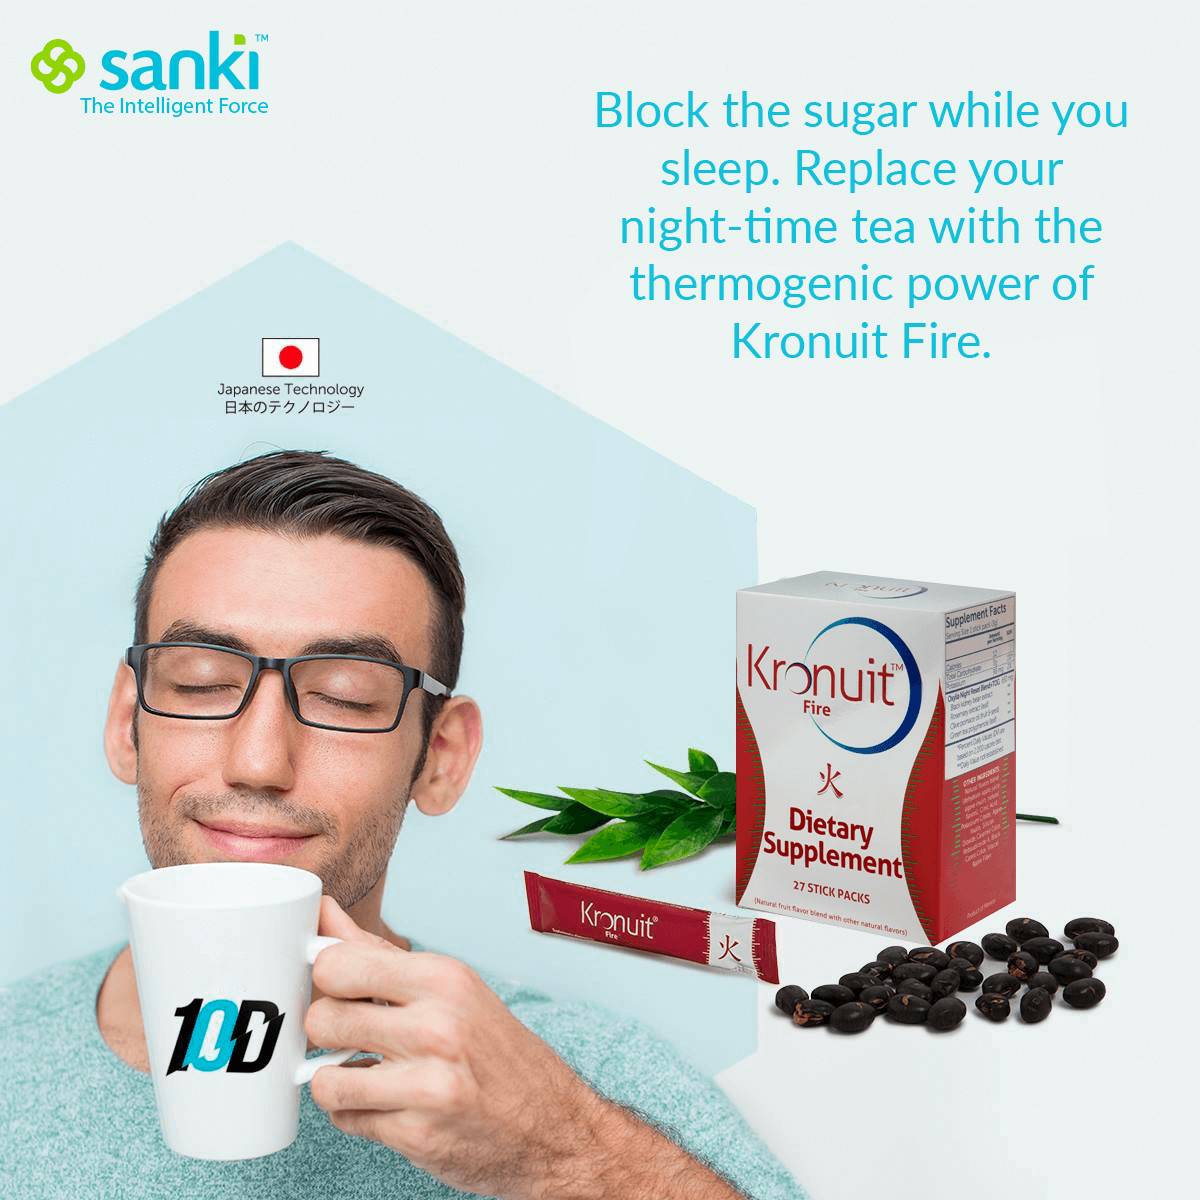 Kronuit Fire reduces the absorption of sugars and carbohydrates while you sleep. #Sanki #Kronuit #SankiUSA #SankiFit #ILiveMyDreams #HealthIsWealth #IntelligentForce #ThePerfectPlan